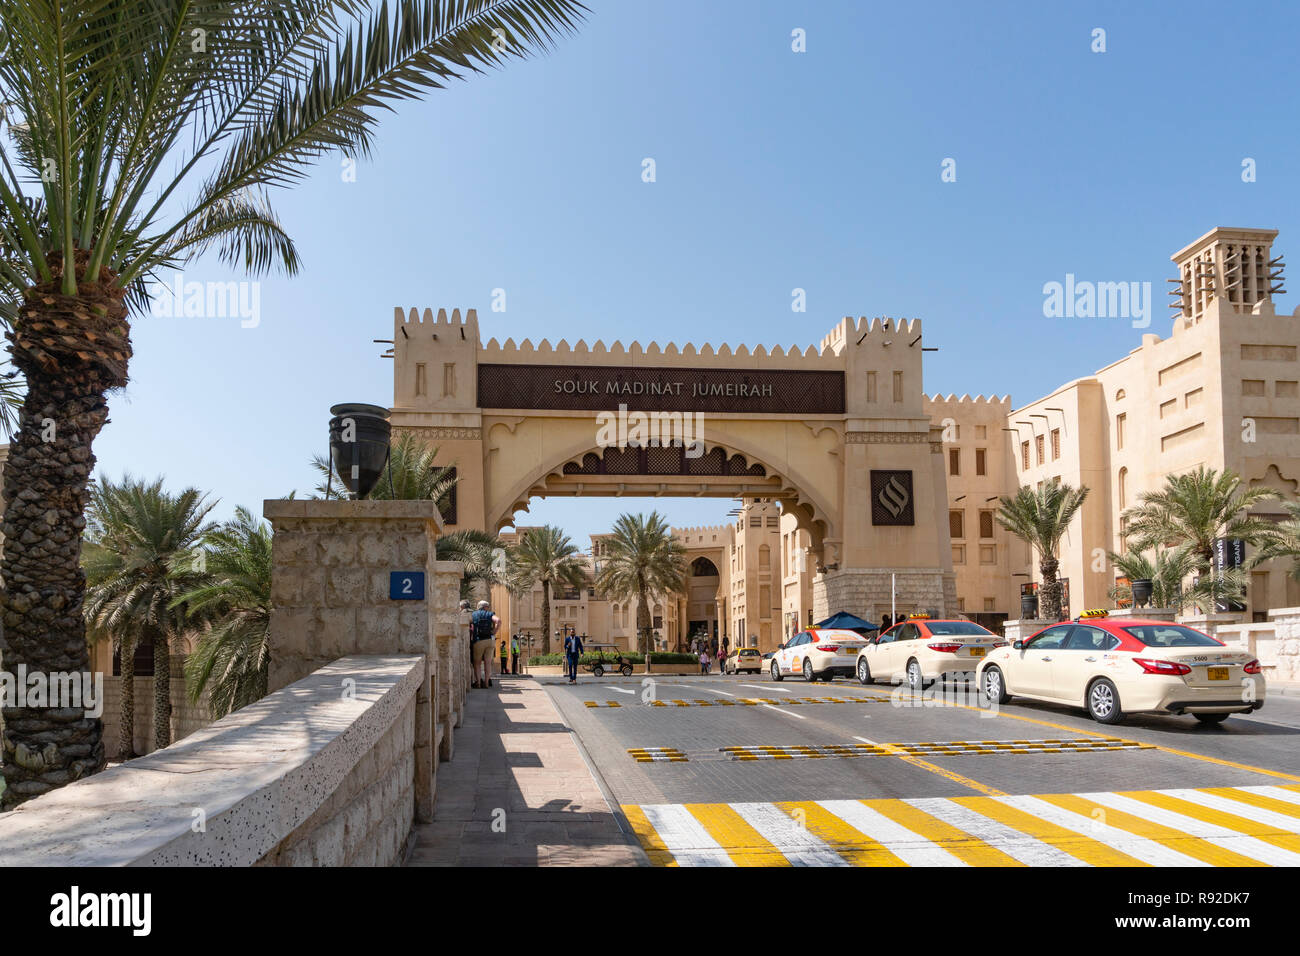 View of the entrance of Souk Madinat Jumeirah in Dubai, UAE Stock Photo